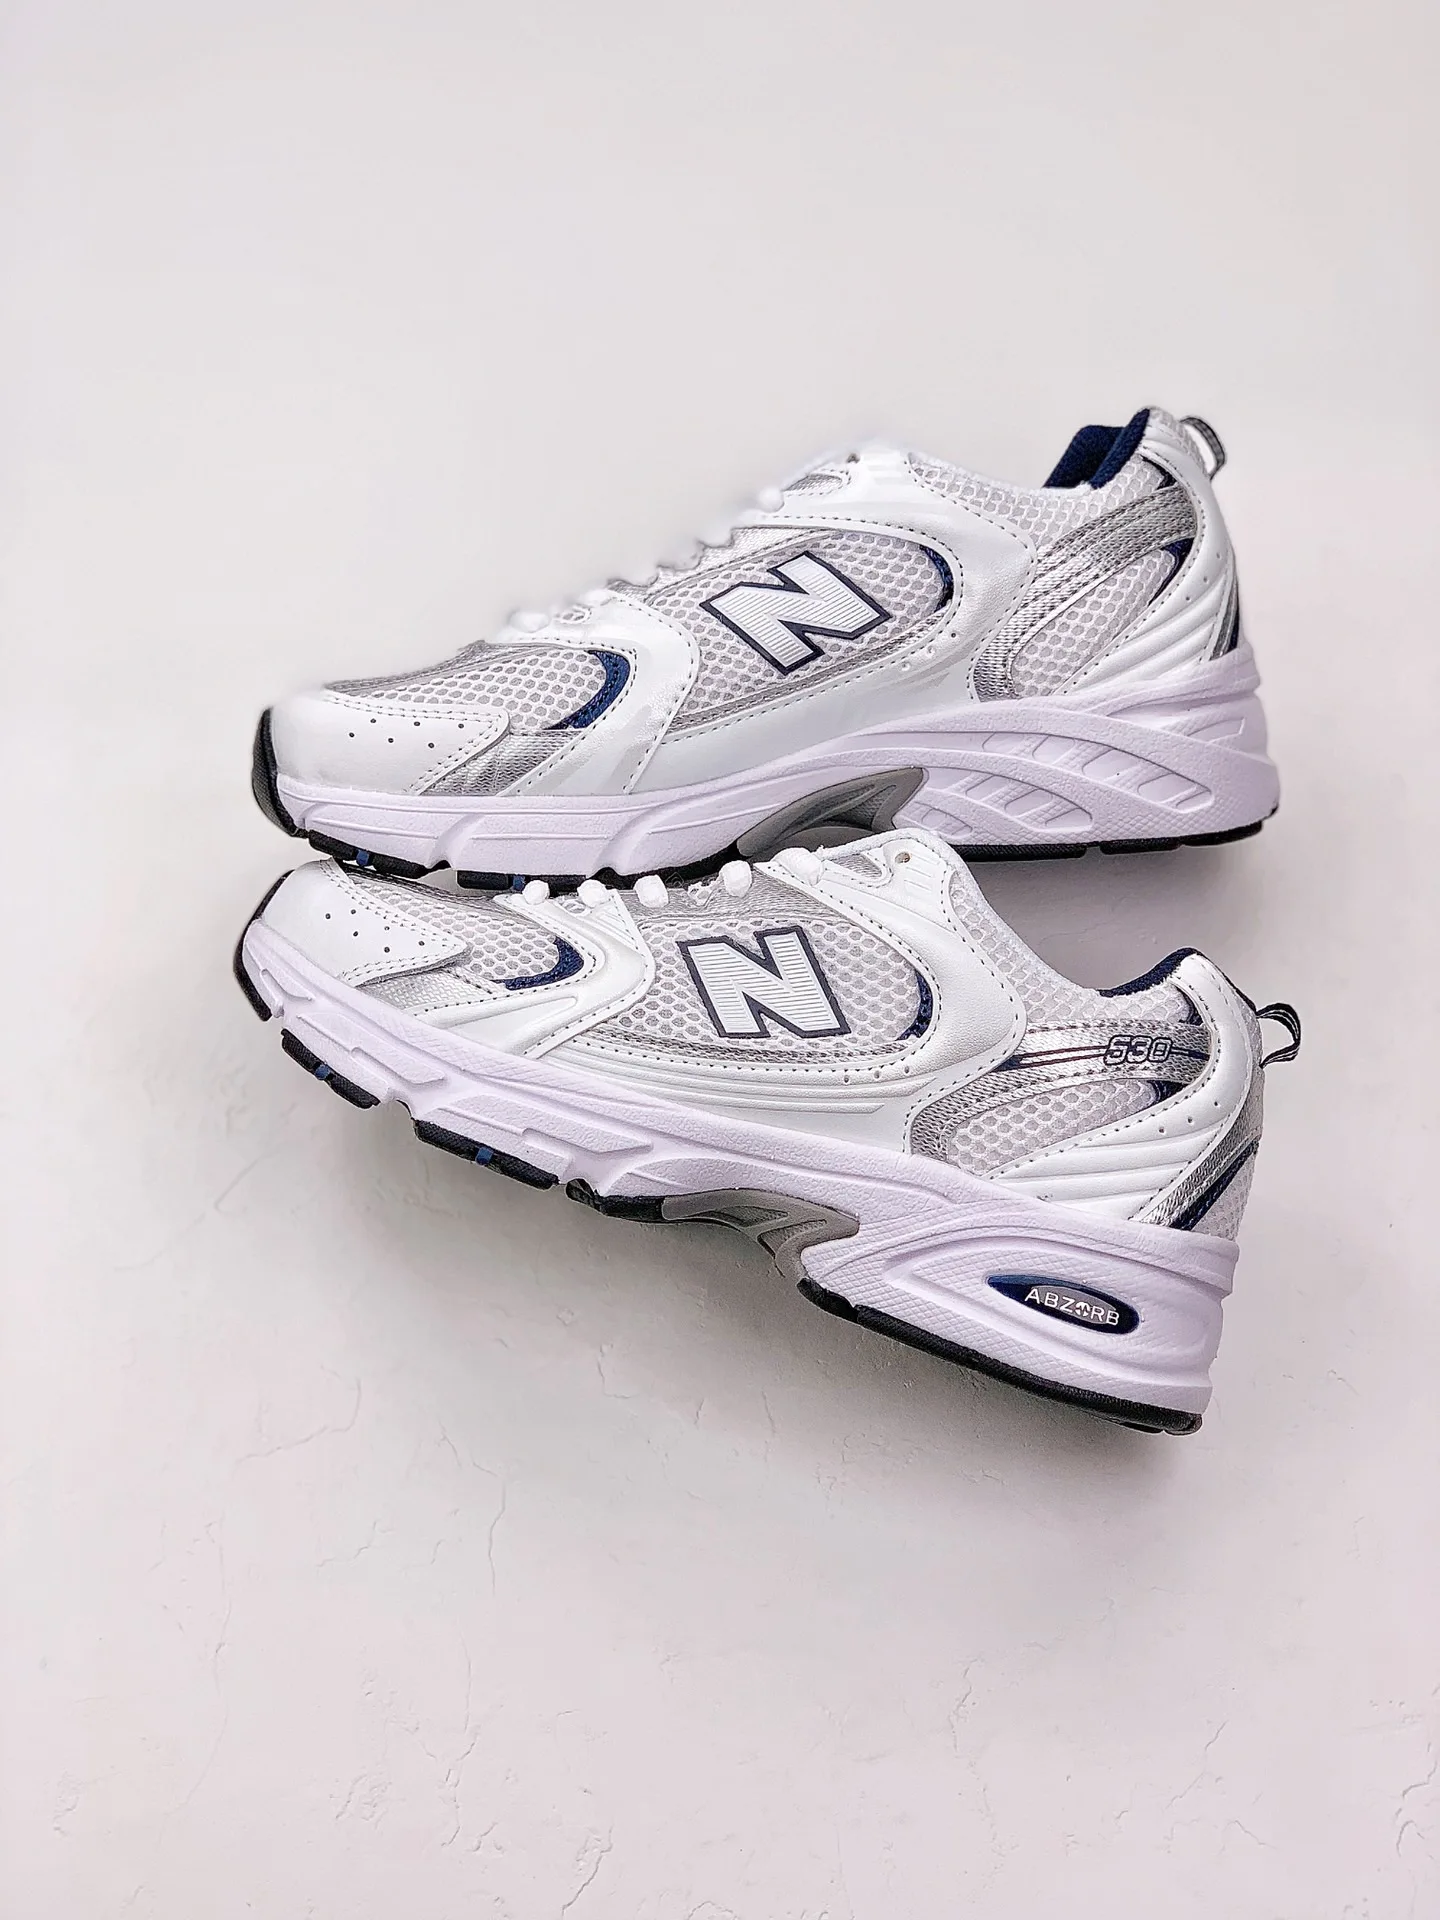 

New Balance 530 Women's Running Shoes Unisex Retro Casual Men's Shoes Women's Sports Shoes Durable and Lightweight 2021hot style